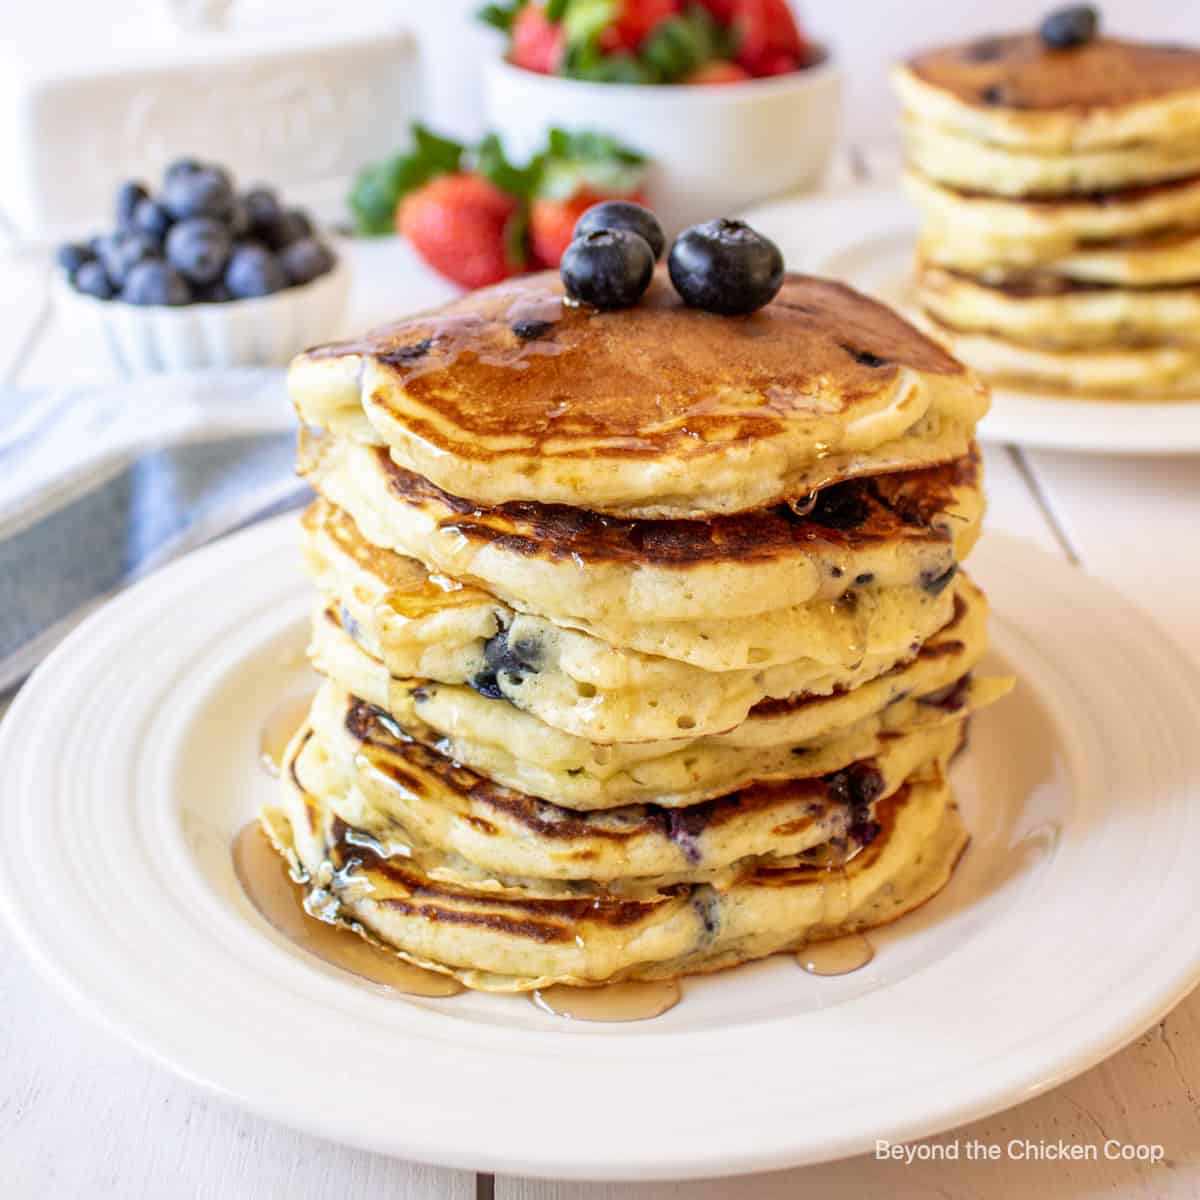 Pancakes stacked on a plate and topped with berries and syrup.